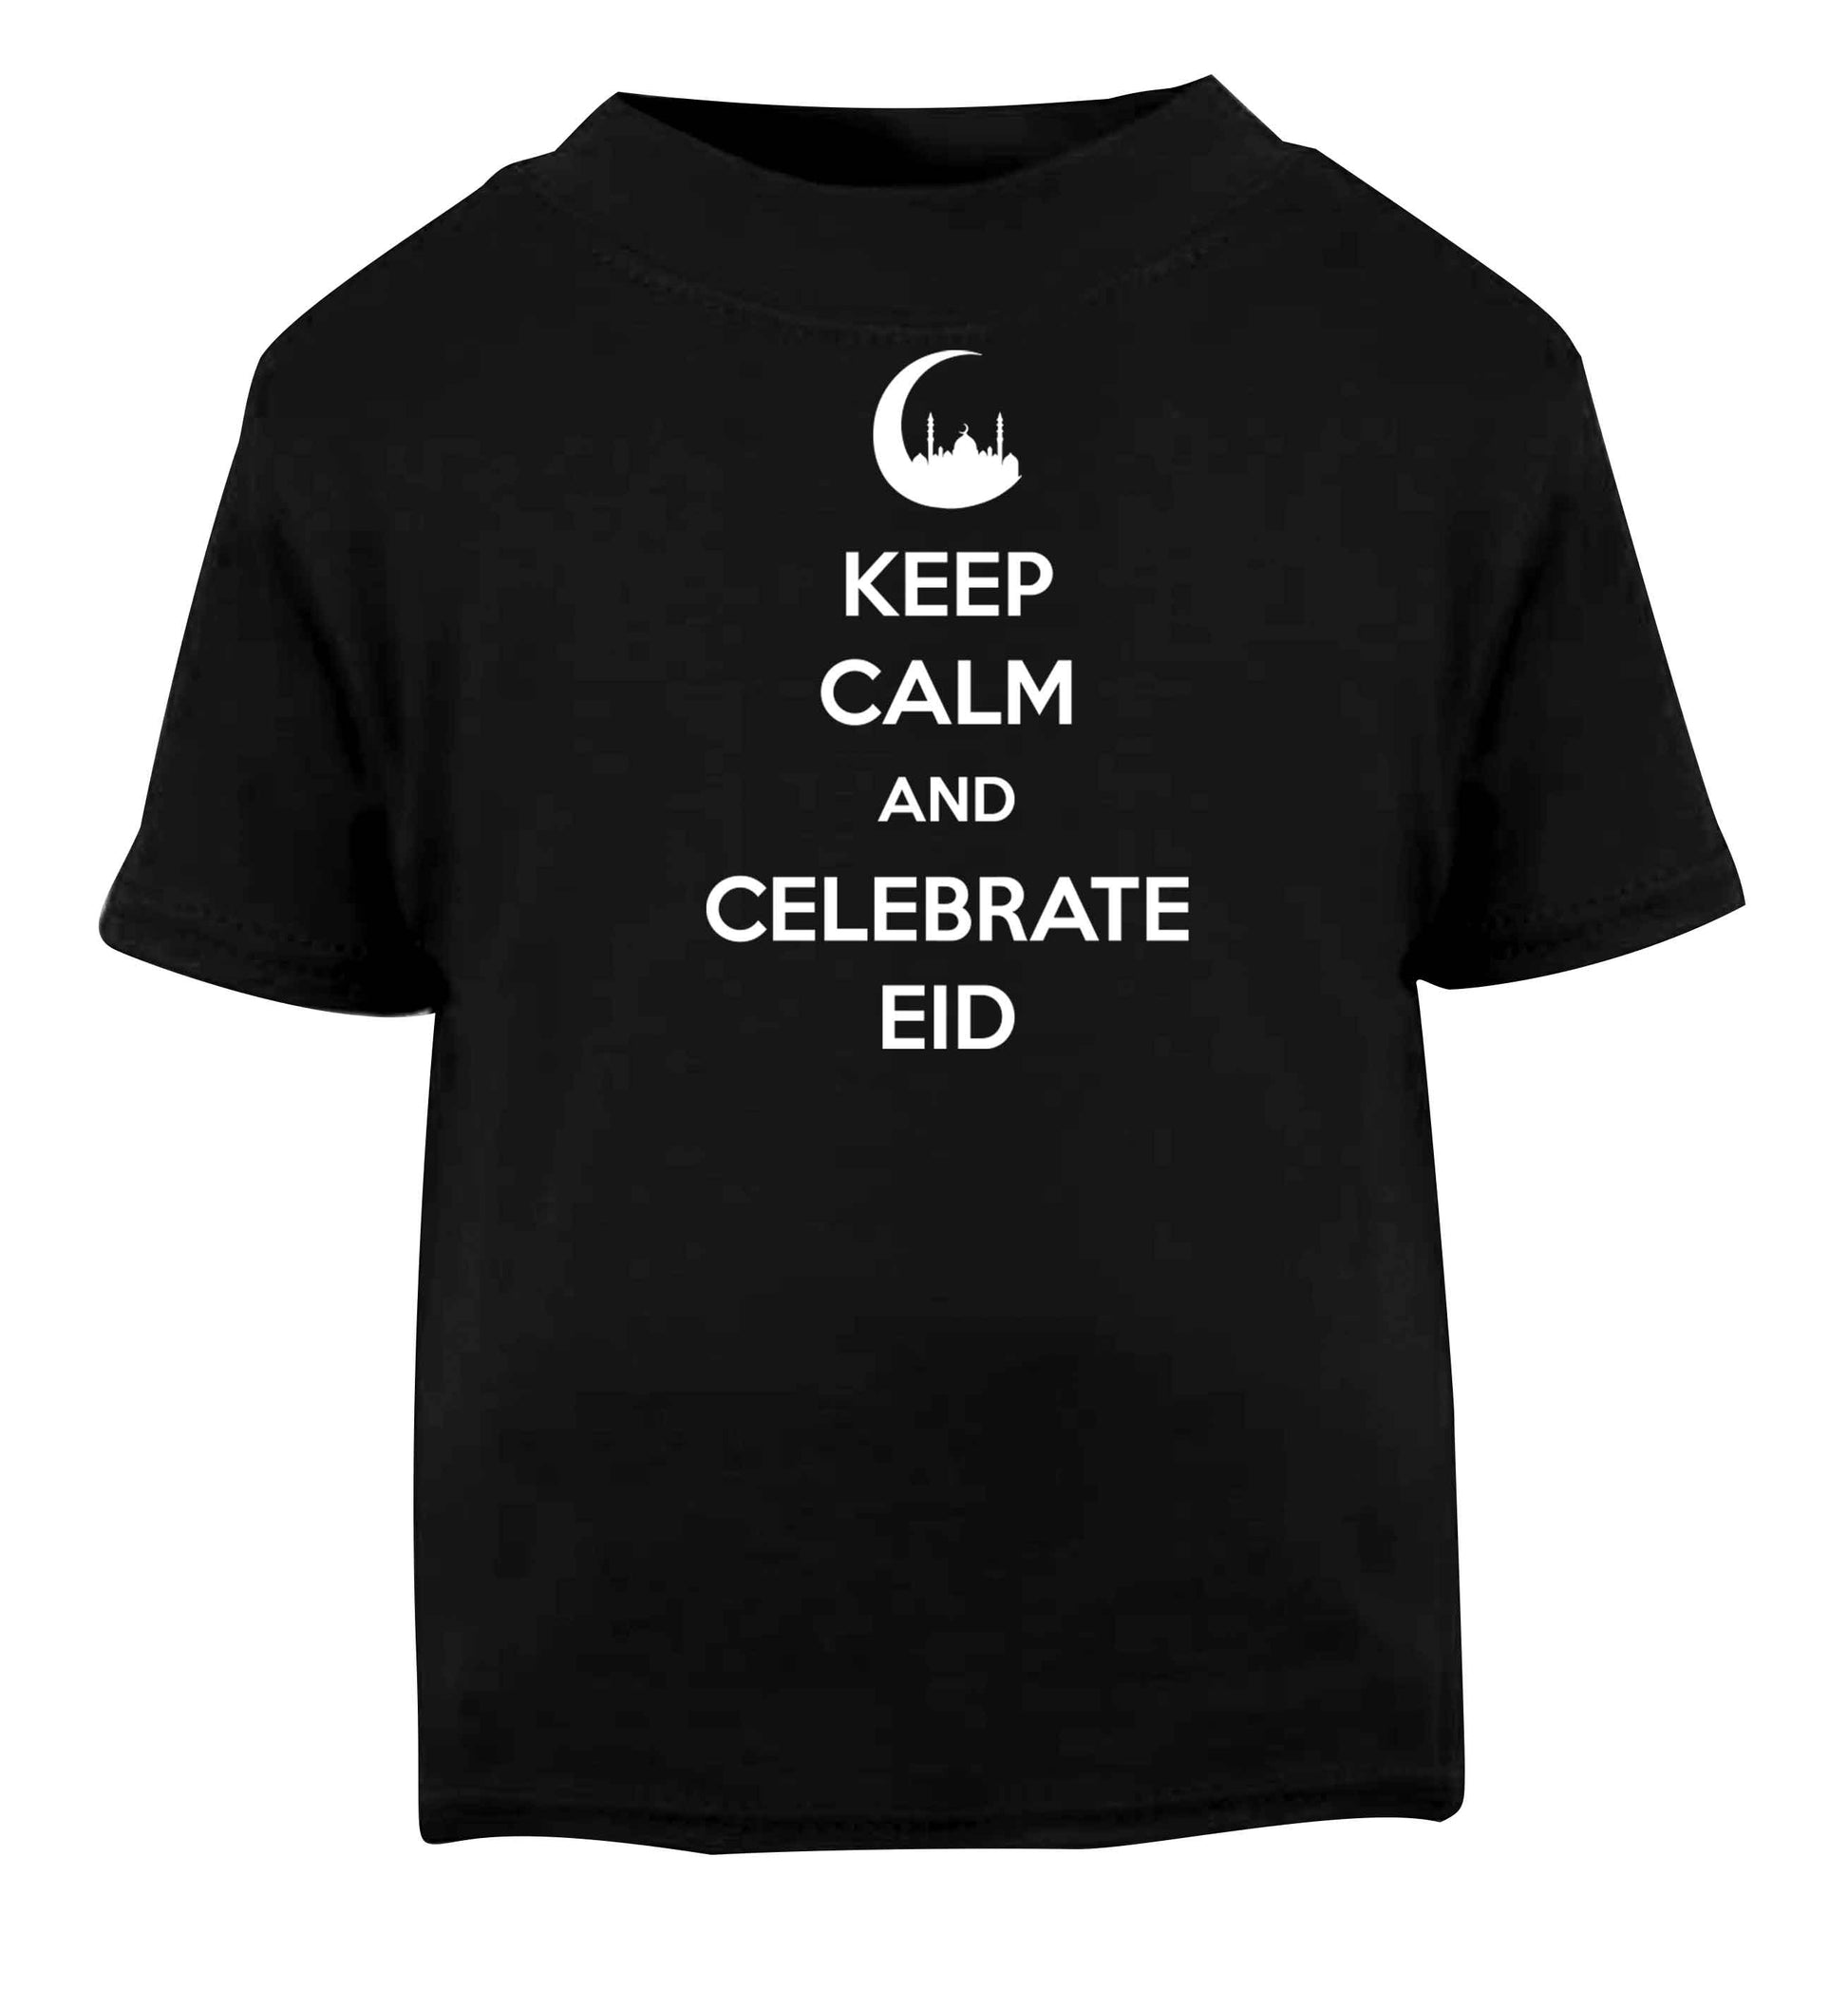 Keep calm and celebrate Eid Black baby toddler Tshirt 2 years